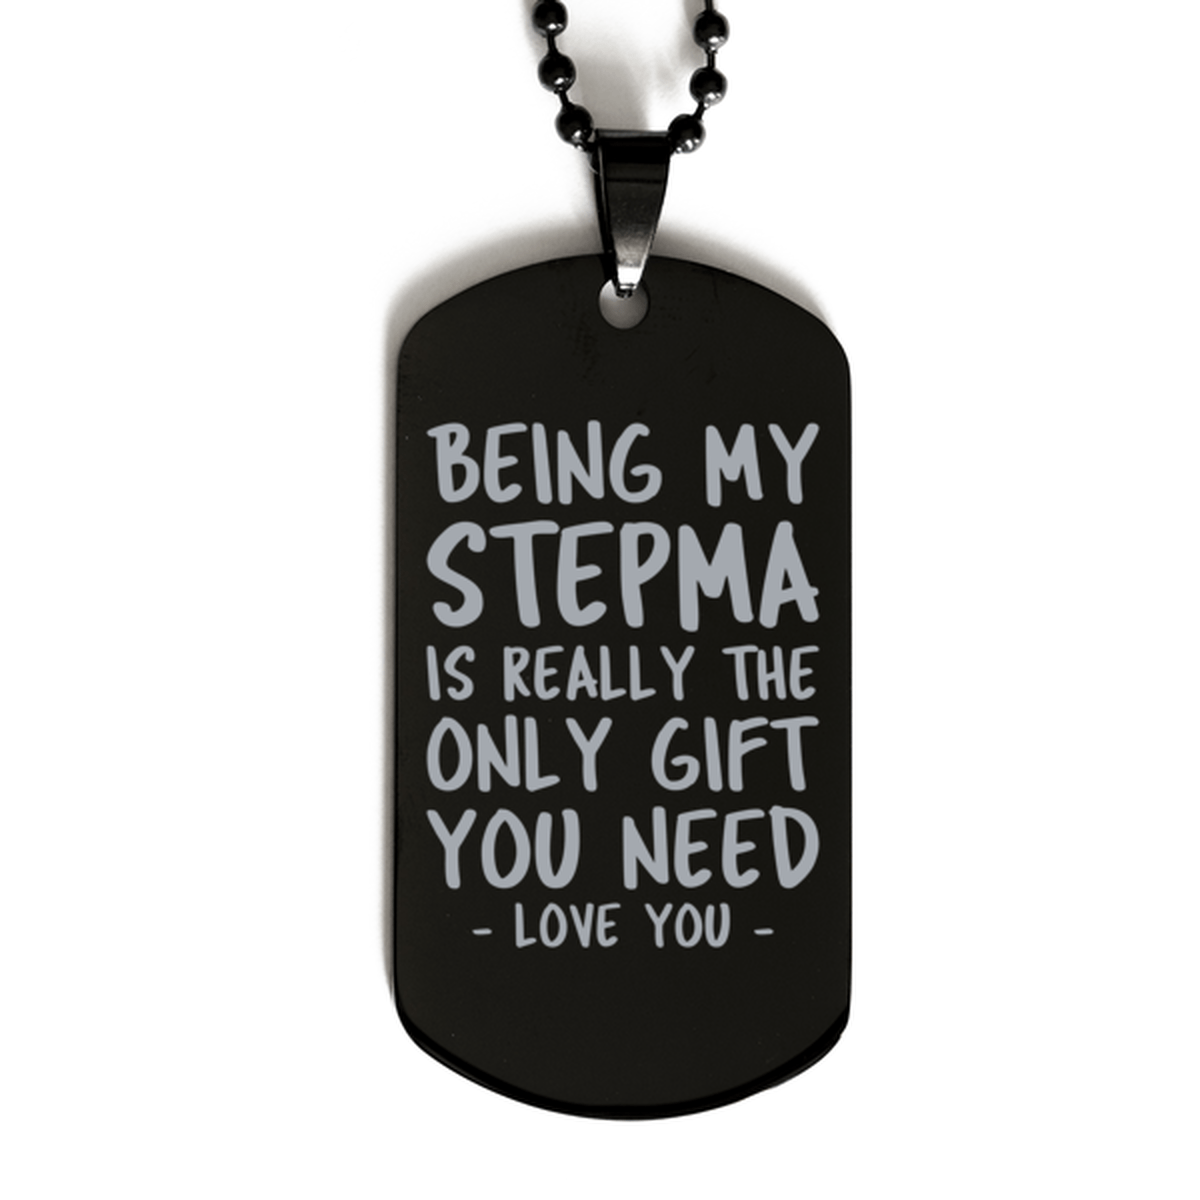 Funny Stepma Black Dog Tag Necklace, Being My Stepma Is Really the Only Gift You Need, Best Birthday Gifts for Stepma